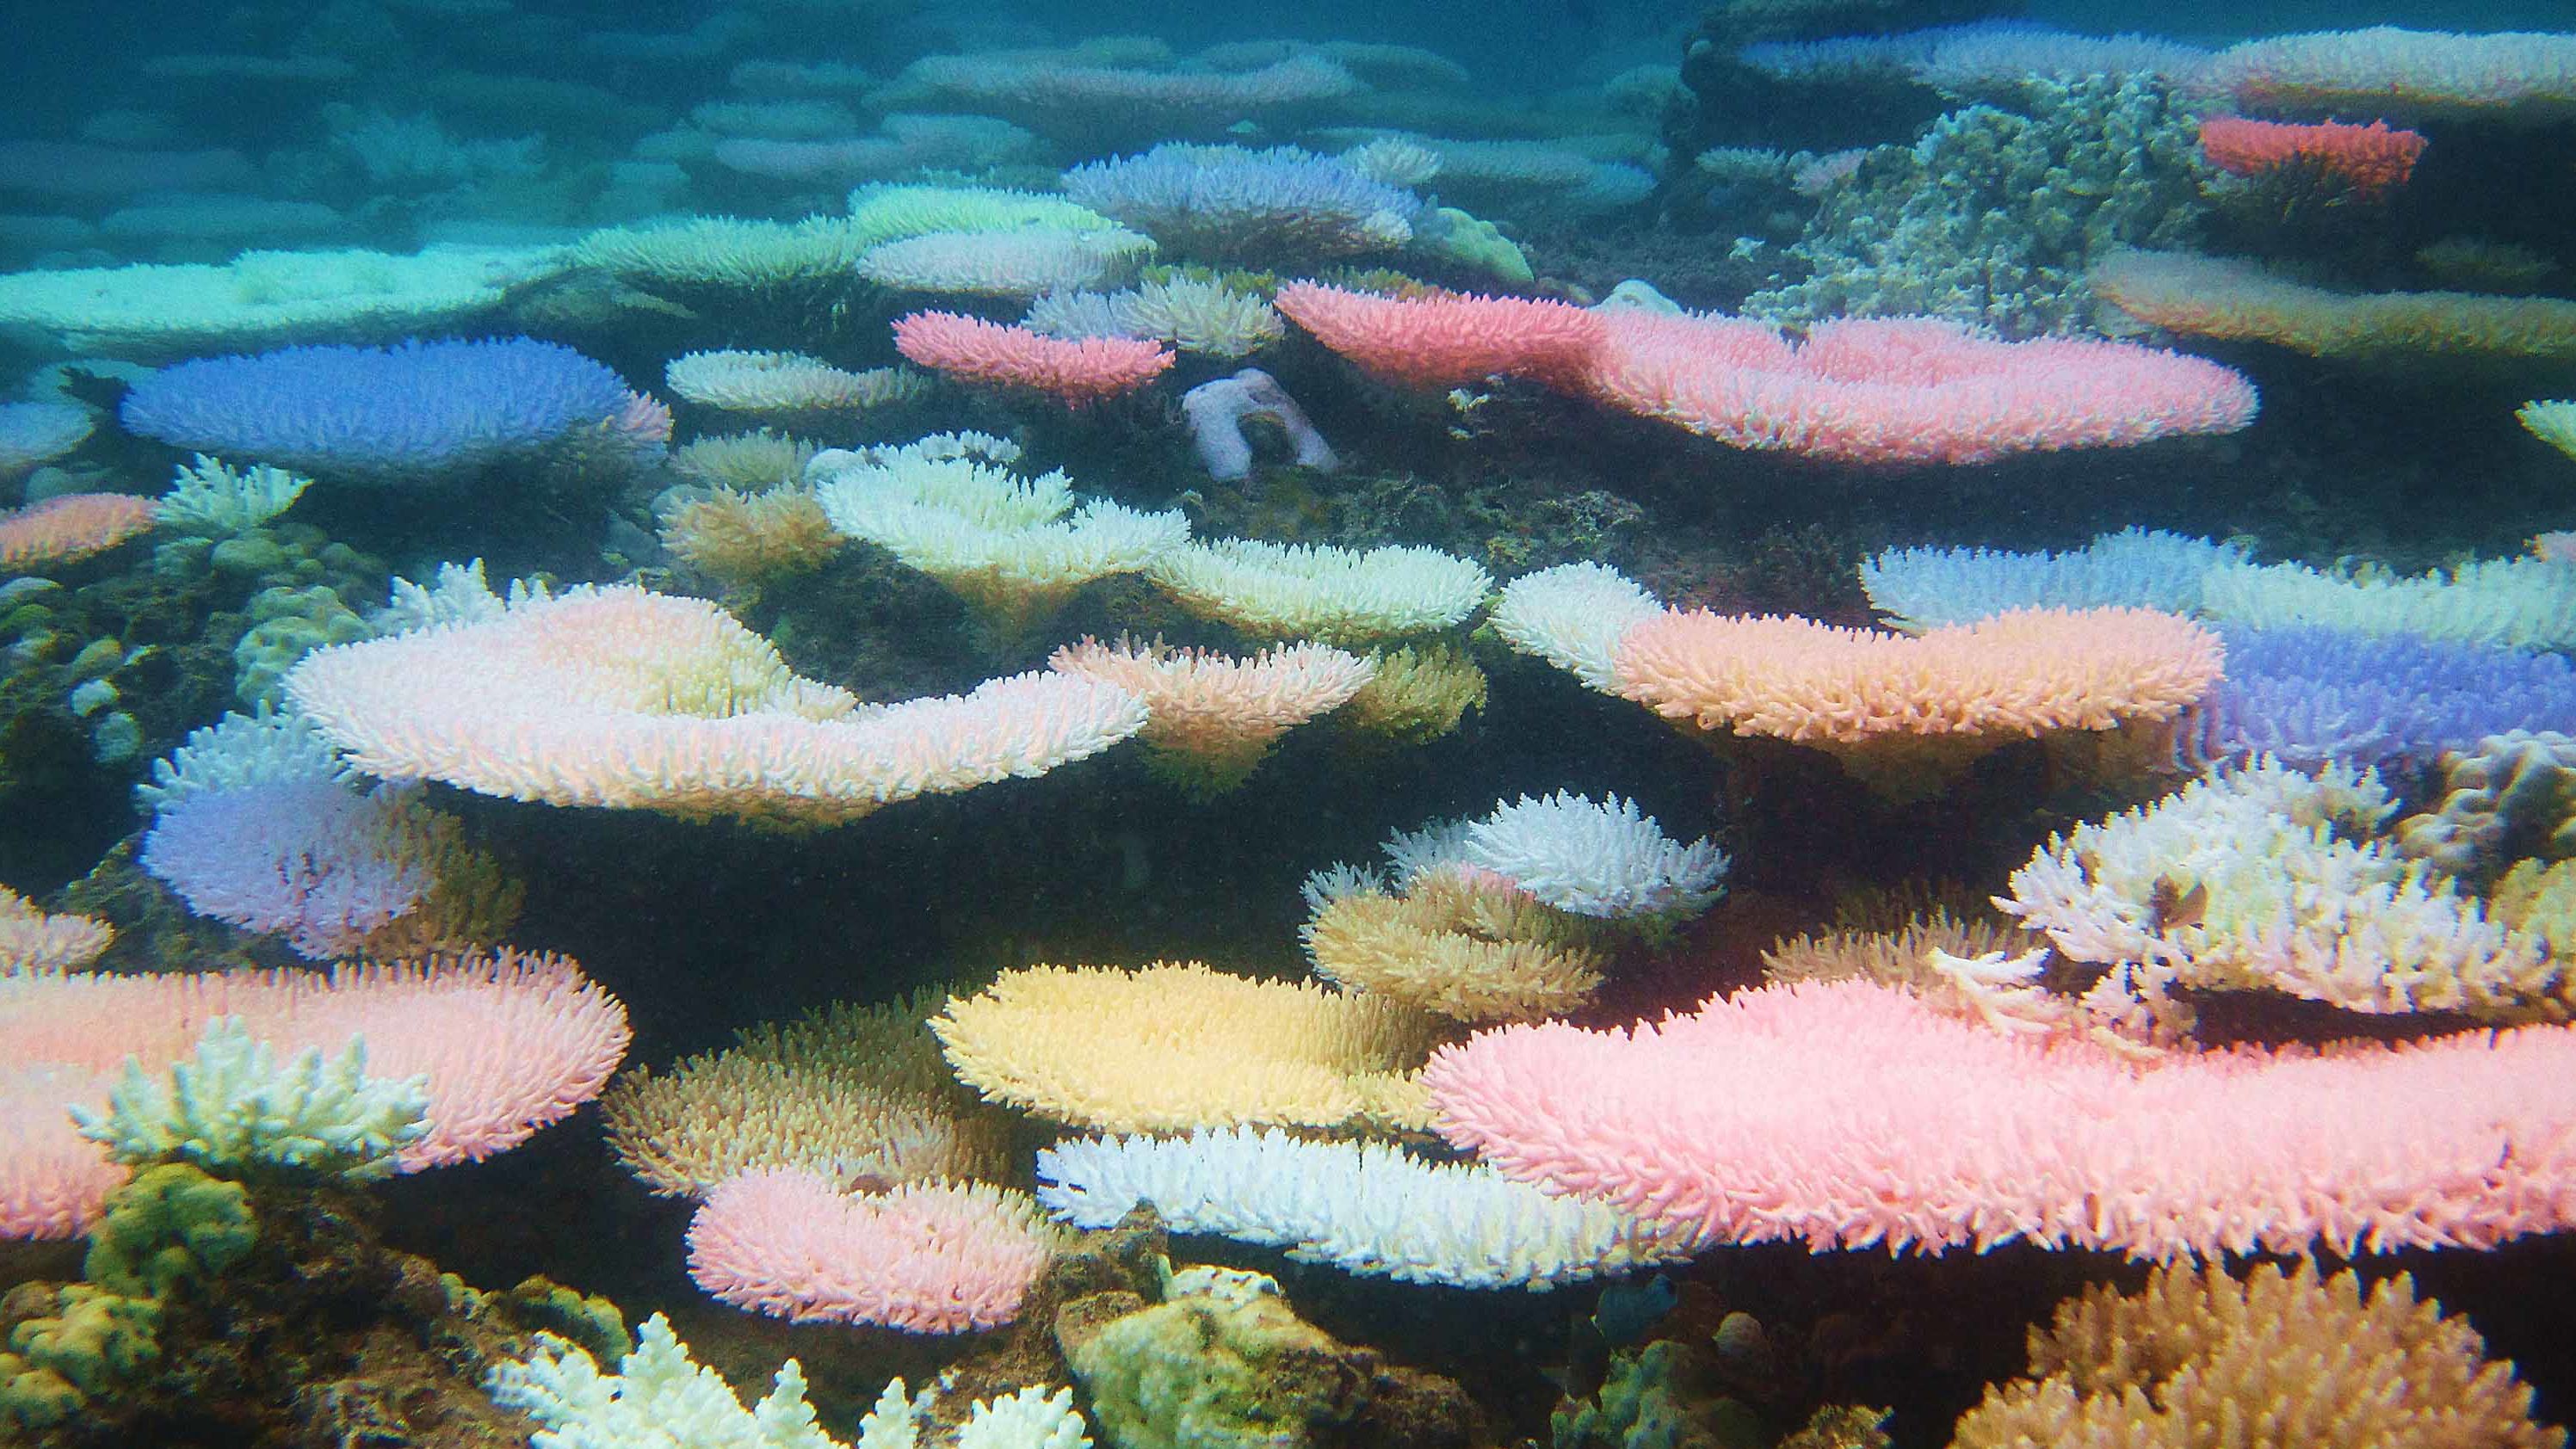 Acropora corals experienced colorful bleaching in 2010 off the coast of the Philippines.